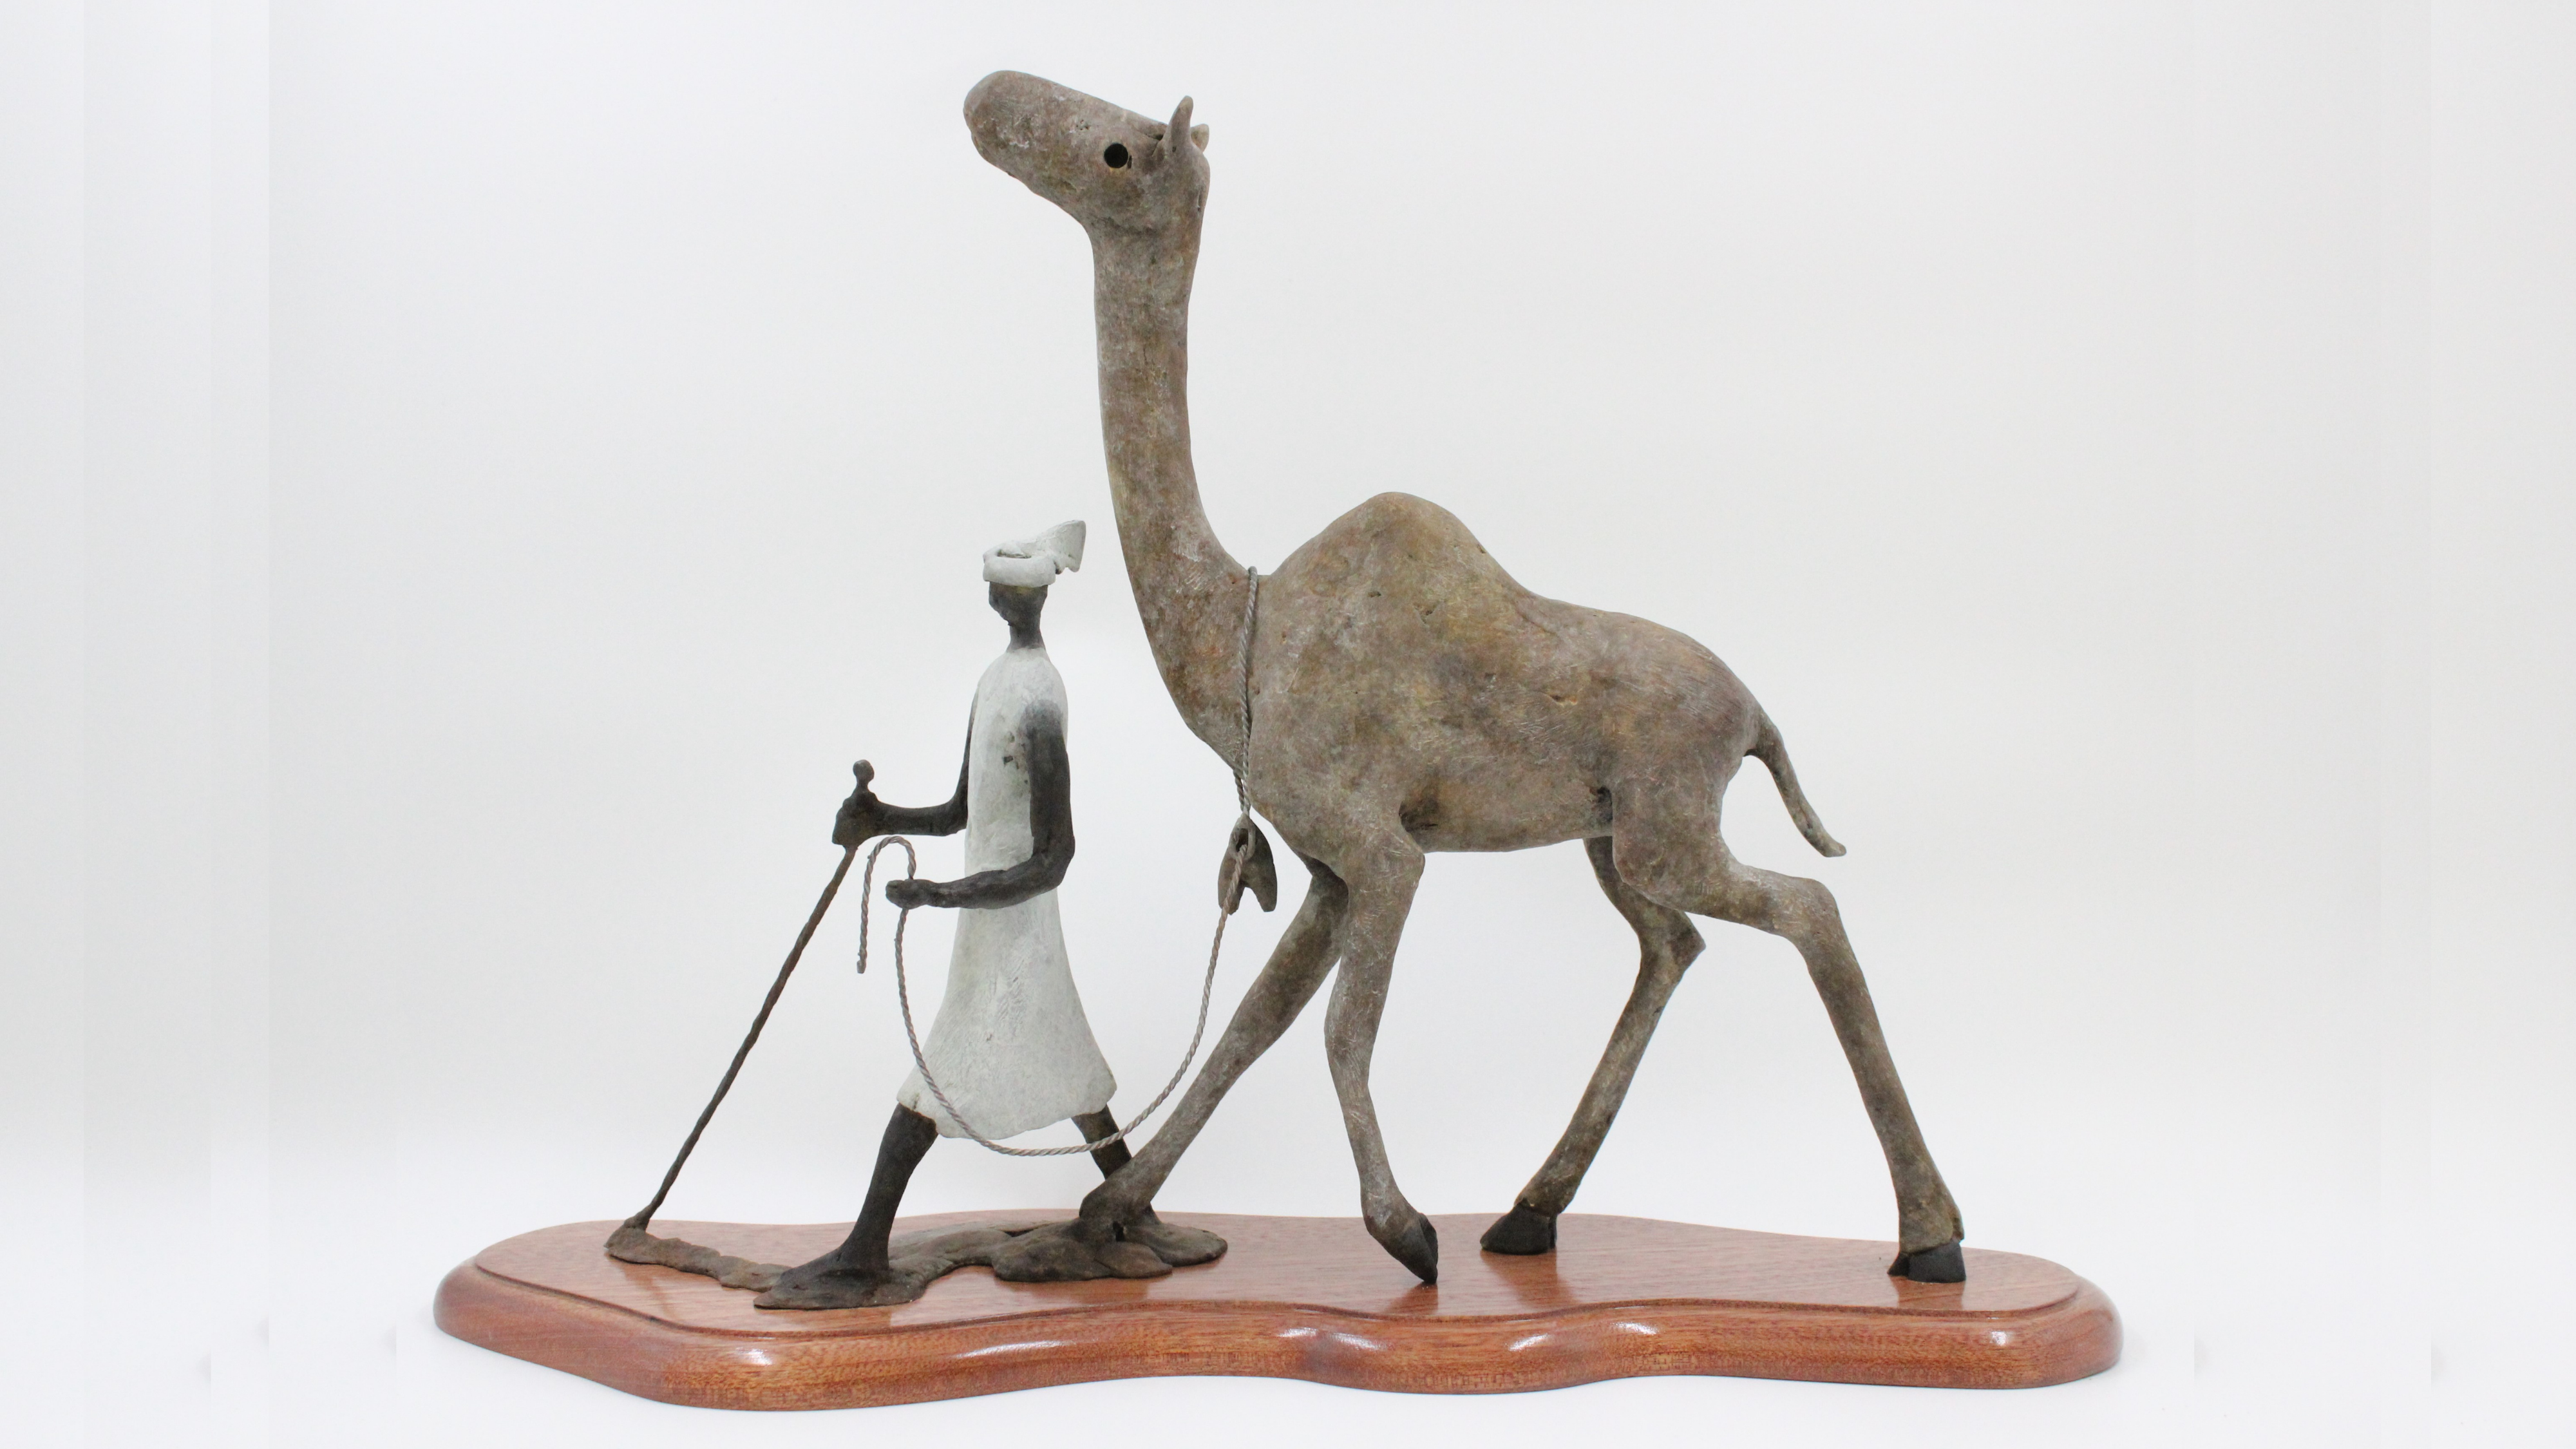 Terry Mathews’ carefully crafted bronze sculpture, depicting a herder in a white garment leading a camel.